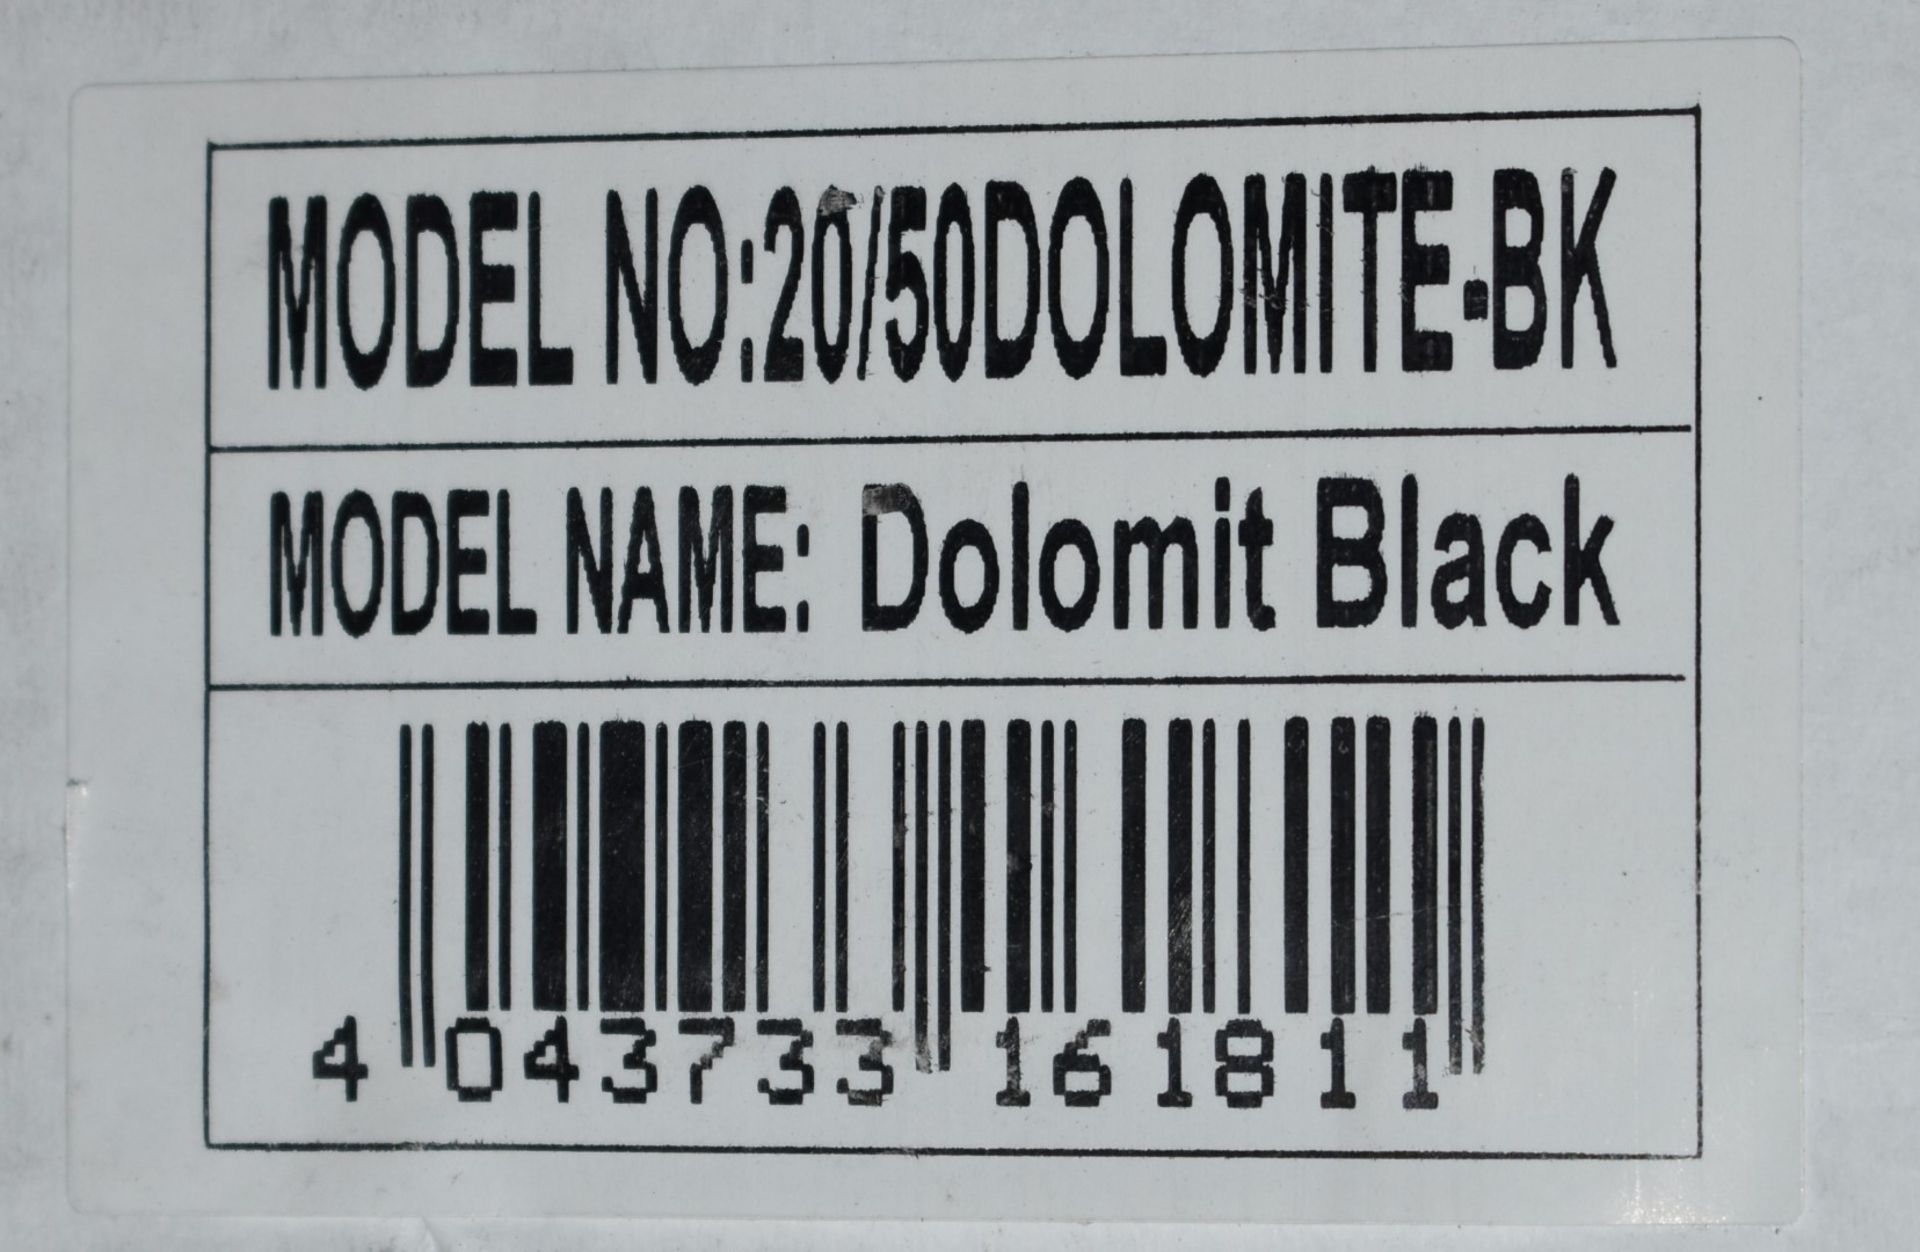 6 x Boxes of RAK Porcelain Floor or Wall Tiles - Dolomit Black - 20 x 50 cm Tiles Covering a Total - Image 8 of 9